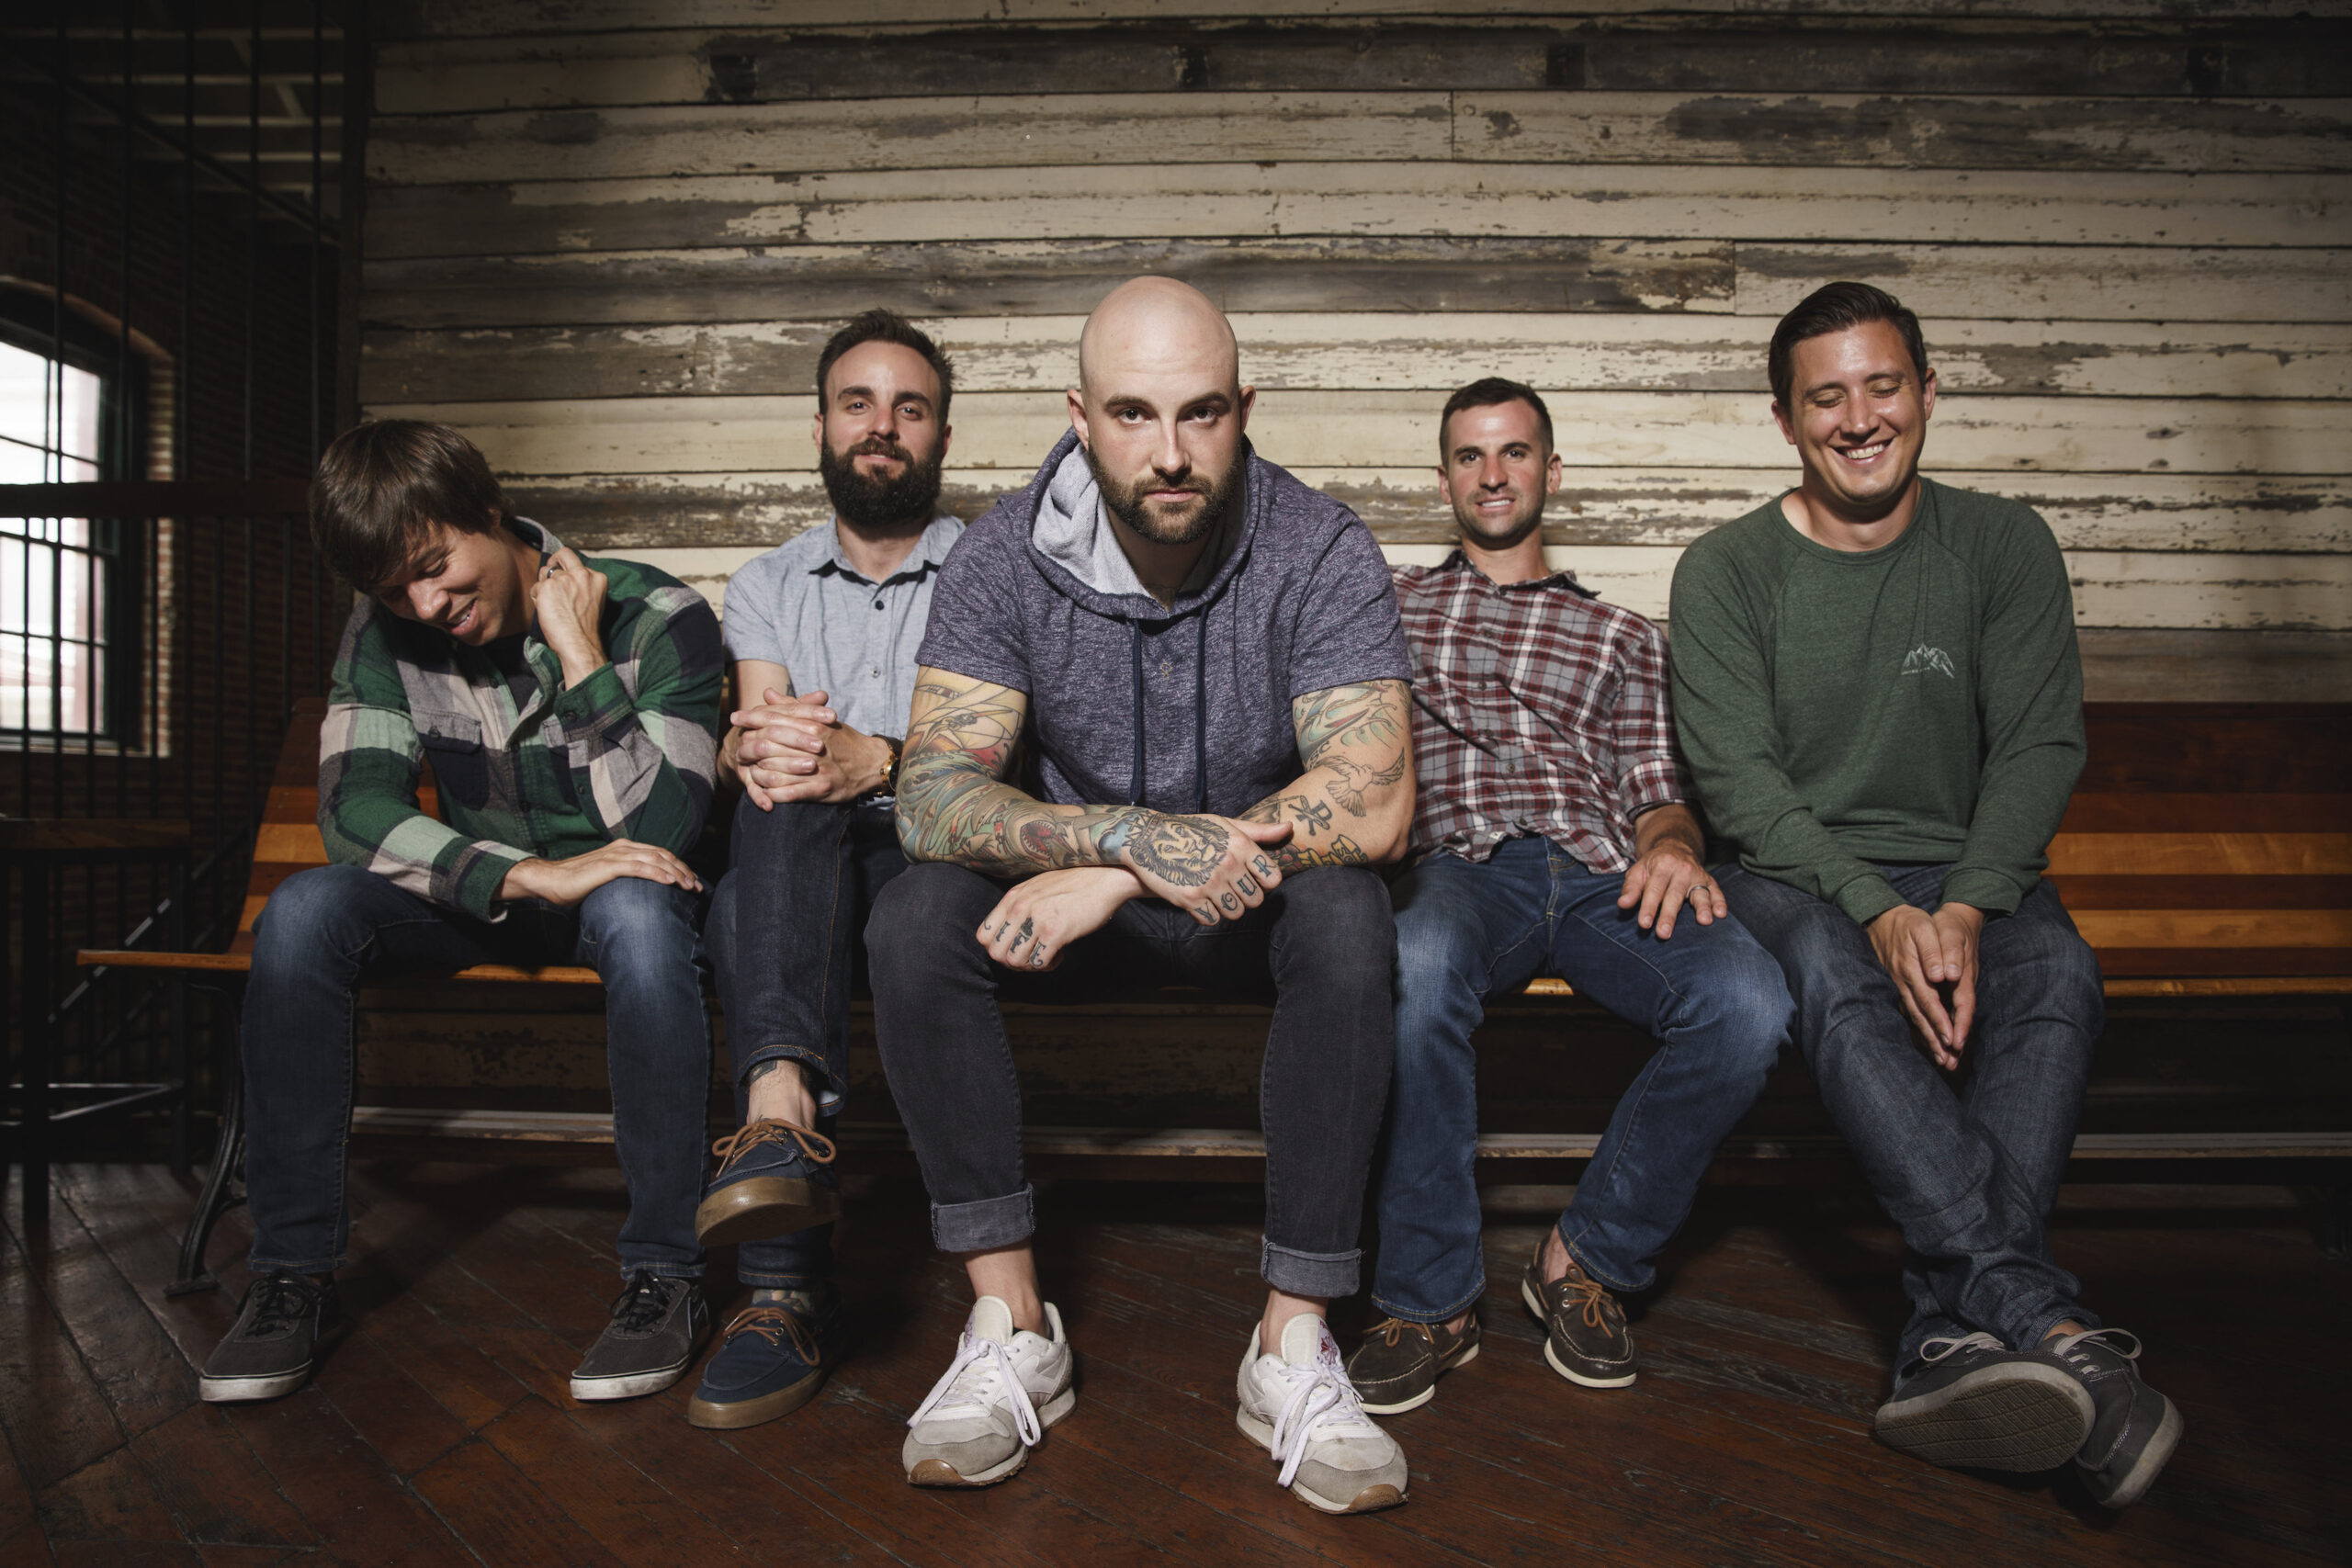 AUGUST BURNS RED ANNOUNCE 10 YEARS OF CONSTELLATIONS 2019 AUSTRALIAN TOUR